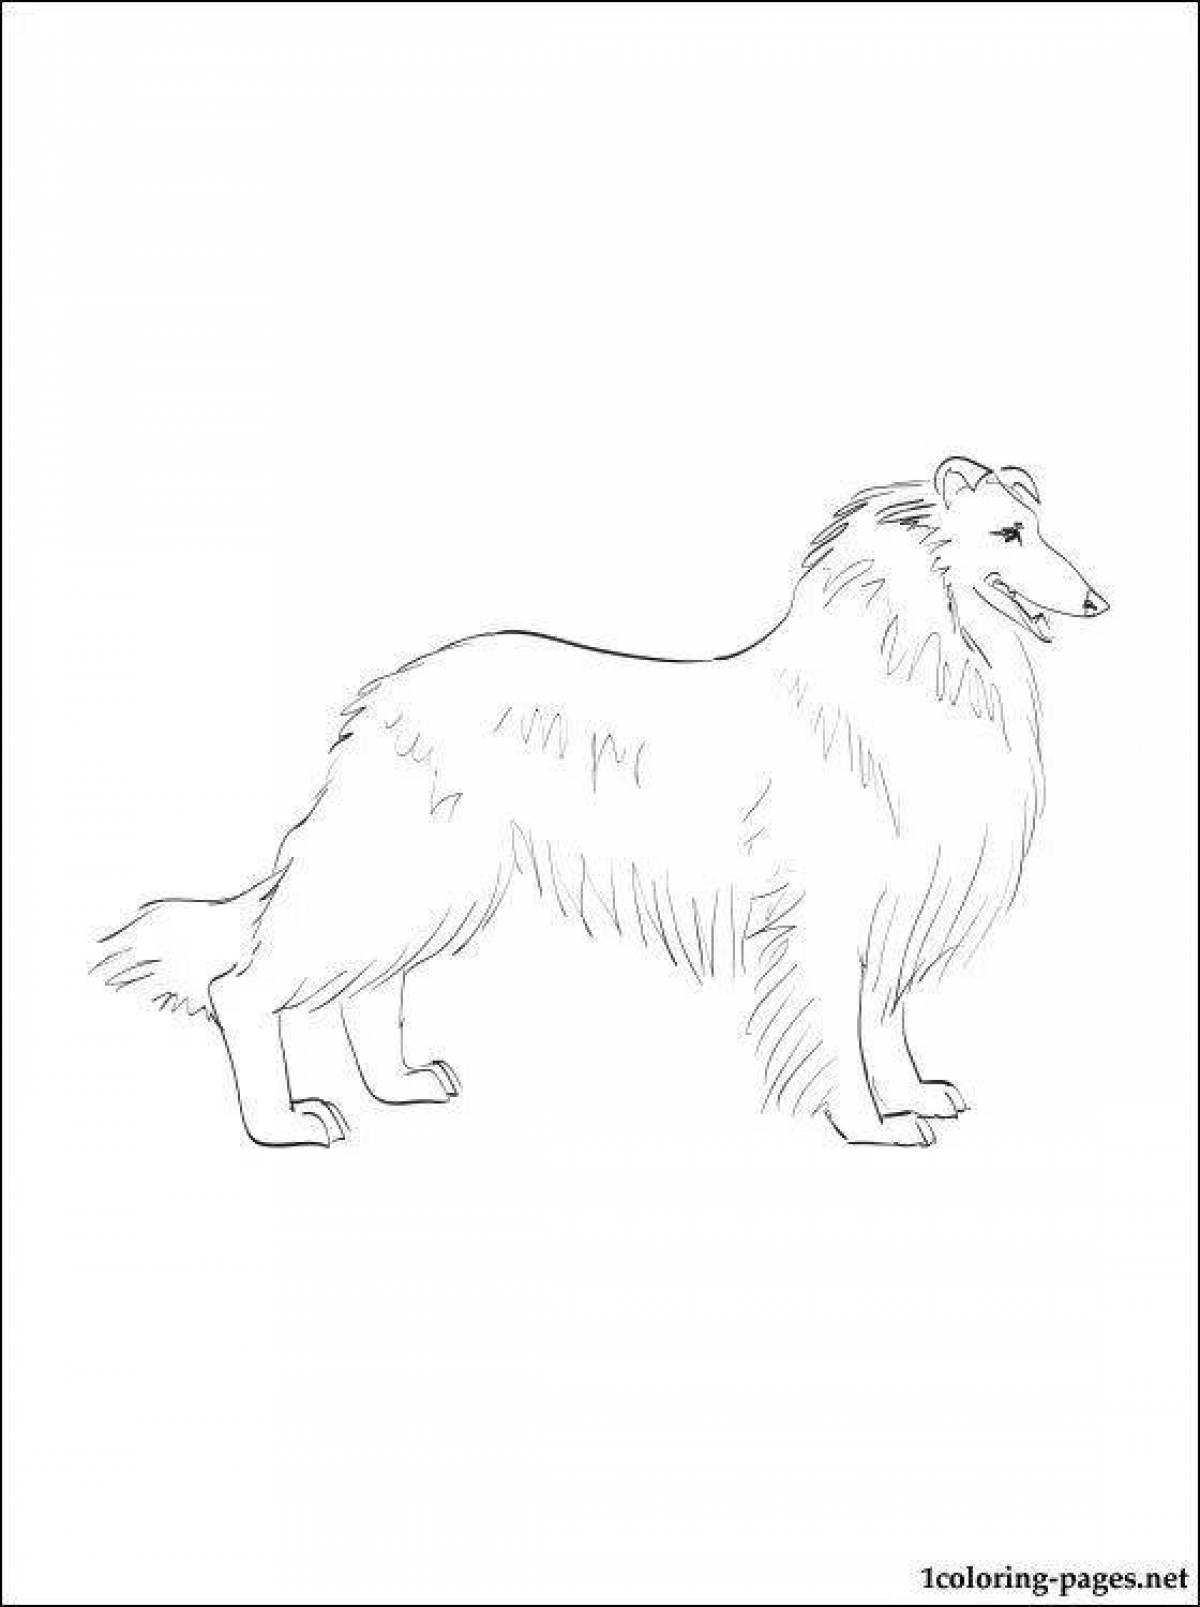 Collie playful coloring page